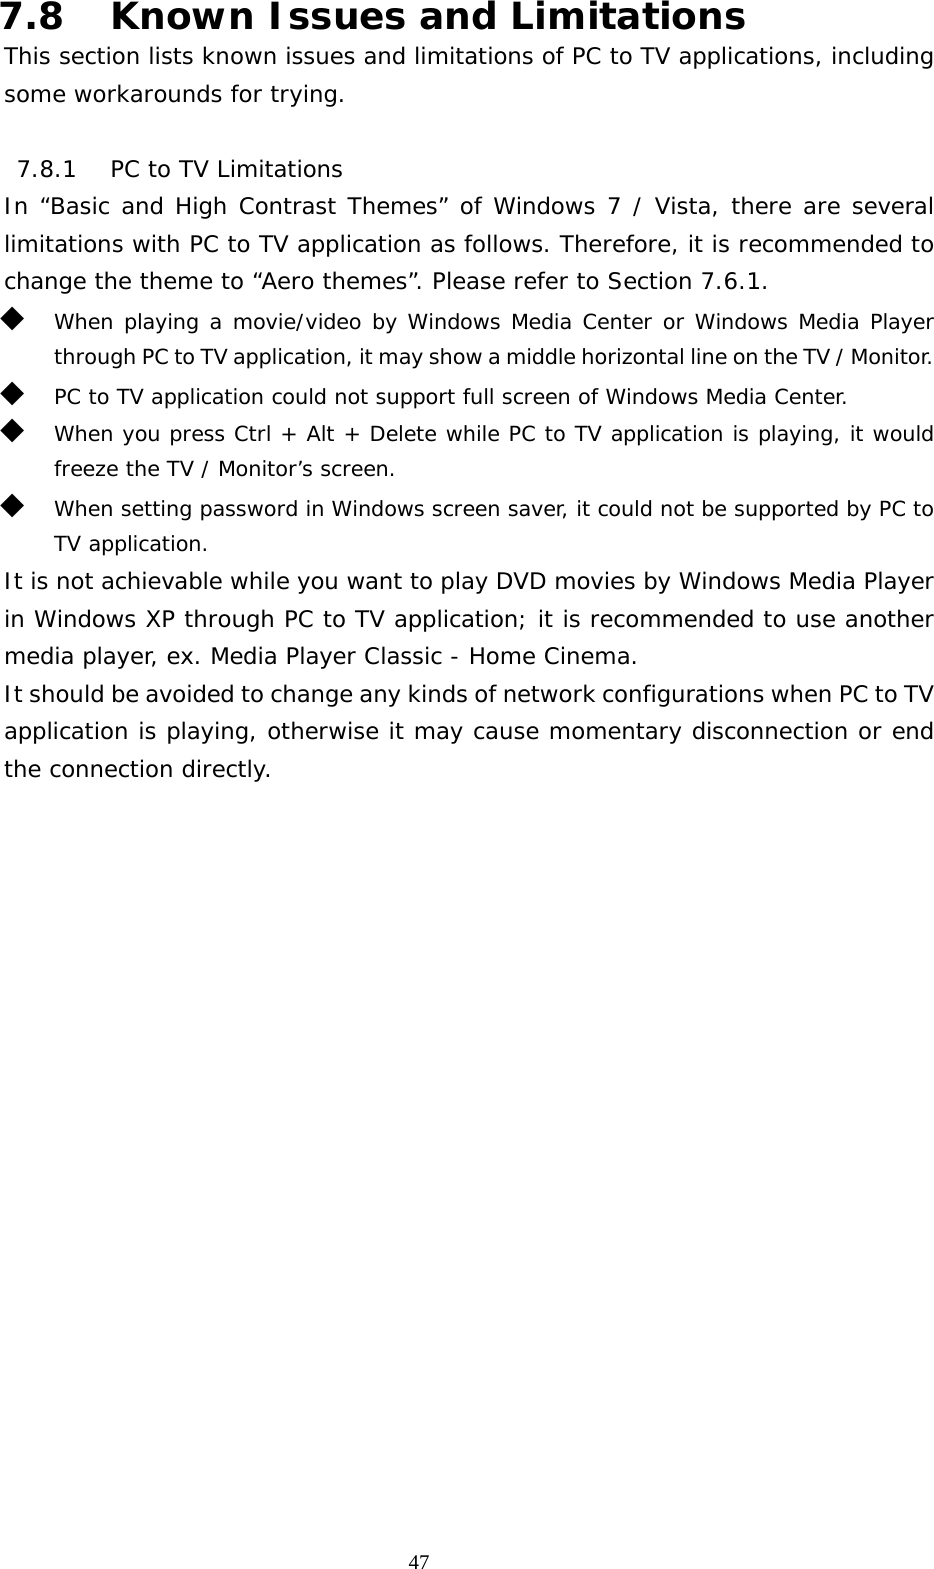   477.8 Known Issues and Limitations This section lists known issues and limitations of PC to TV applications, including some workarounds for trying.  7.8.1 PC to TV Limitations In “Basic and High Contrast Themes” of Windows 7 / Vista, there are several limitations with PC to TV application as follows. Therefore, it is recommended to change the theme to “Aero themes”. Please refer to Section 7.6.1.  When playing a movie/video by Windows Media Center or Windows Media Player through PC to TV application, it may show a middle horizontal line on the TV / Monitor.  PC to TV application could not support full screen of Windows Media Center.  When you press Ctrl + Alt + Delete while PC to TV application is playing, it would freeze the TV / Monitor’s screen.  When setting password in Windows screen saver, it could not be supported by PC to TV application. It is not achievable while you want to play DVD movies by Windows Media Player in Windows XP through PC to TV application; it is recommended to use another media player, ex. Media Player Classic - Home Cinema. It should be avoided to change any kinds of network configurations when PC to TV application is playing, otherwise it may cause momentary disconnection or end the connection directly. 